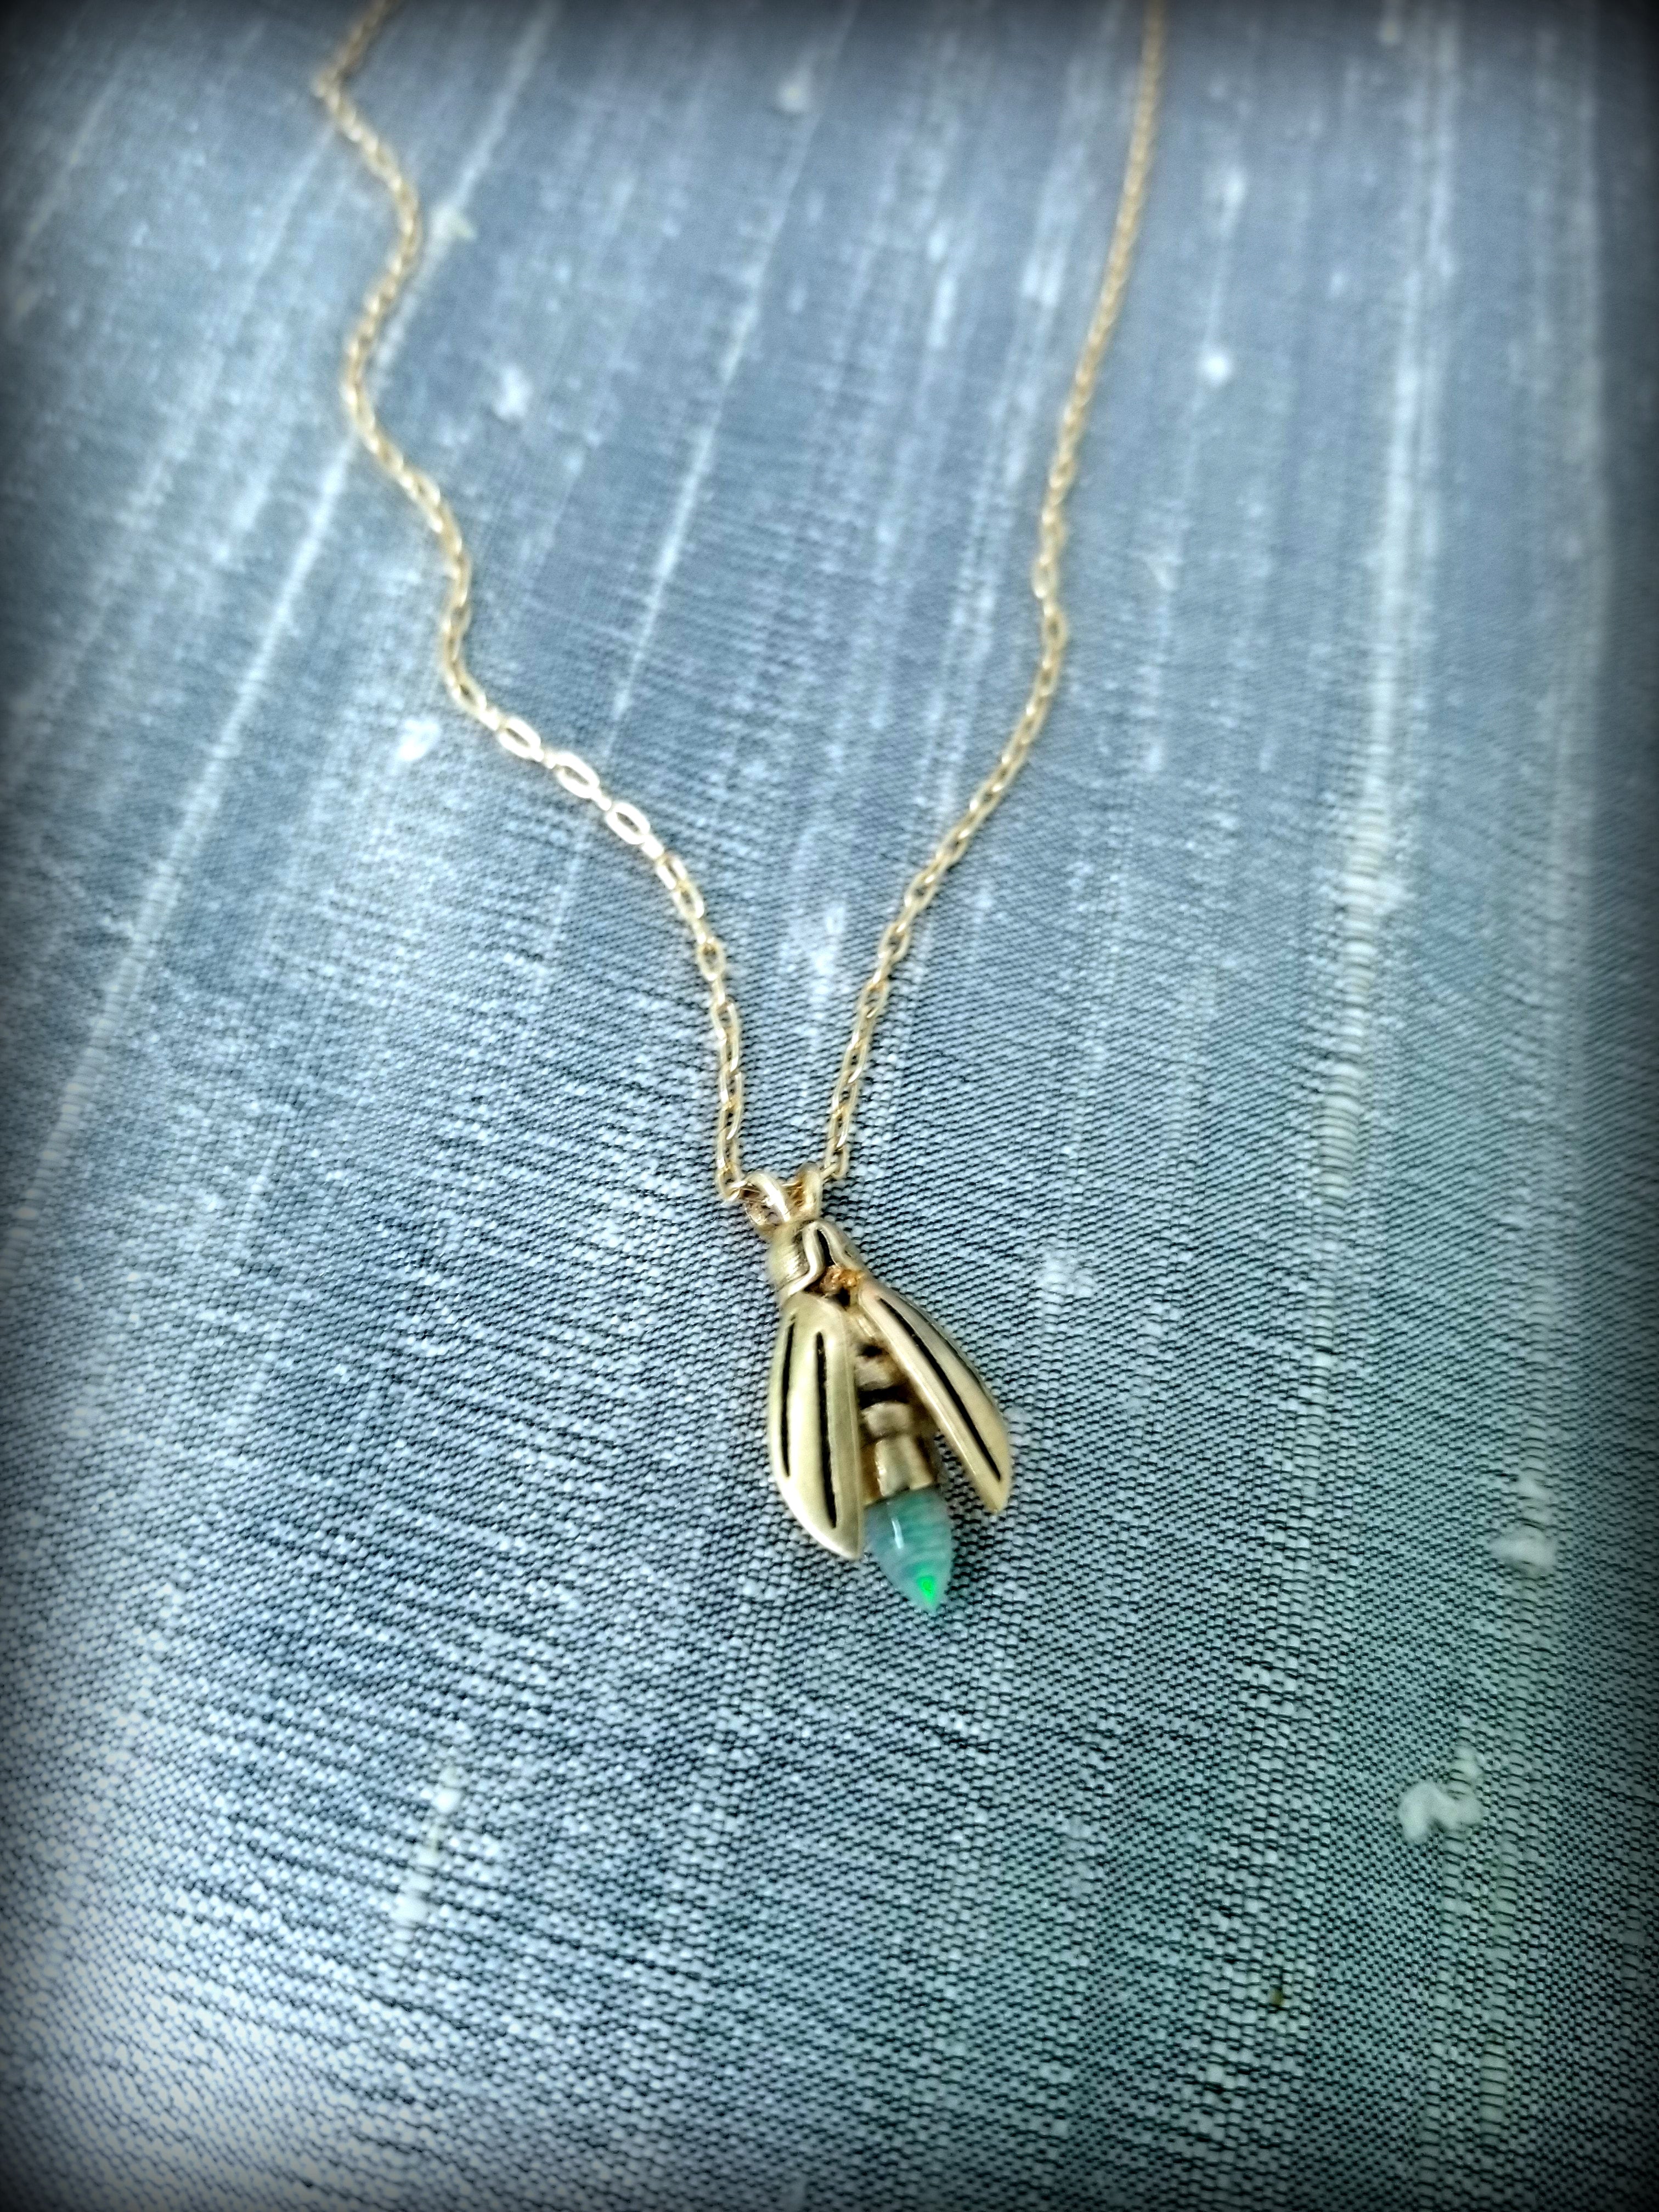 Firefly Necklace Dreams Like Fireflies Southern Rustic Country Womens  Jewelry